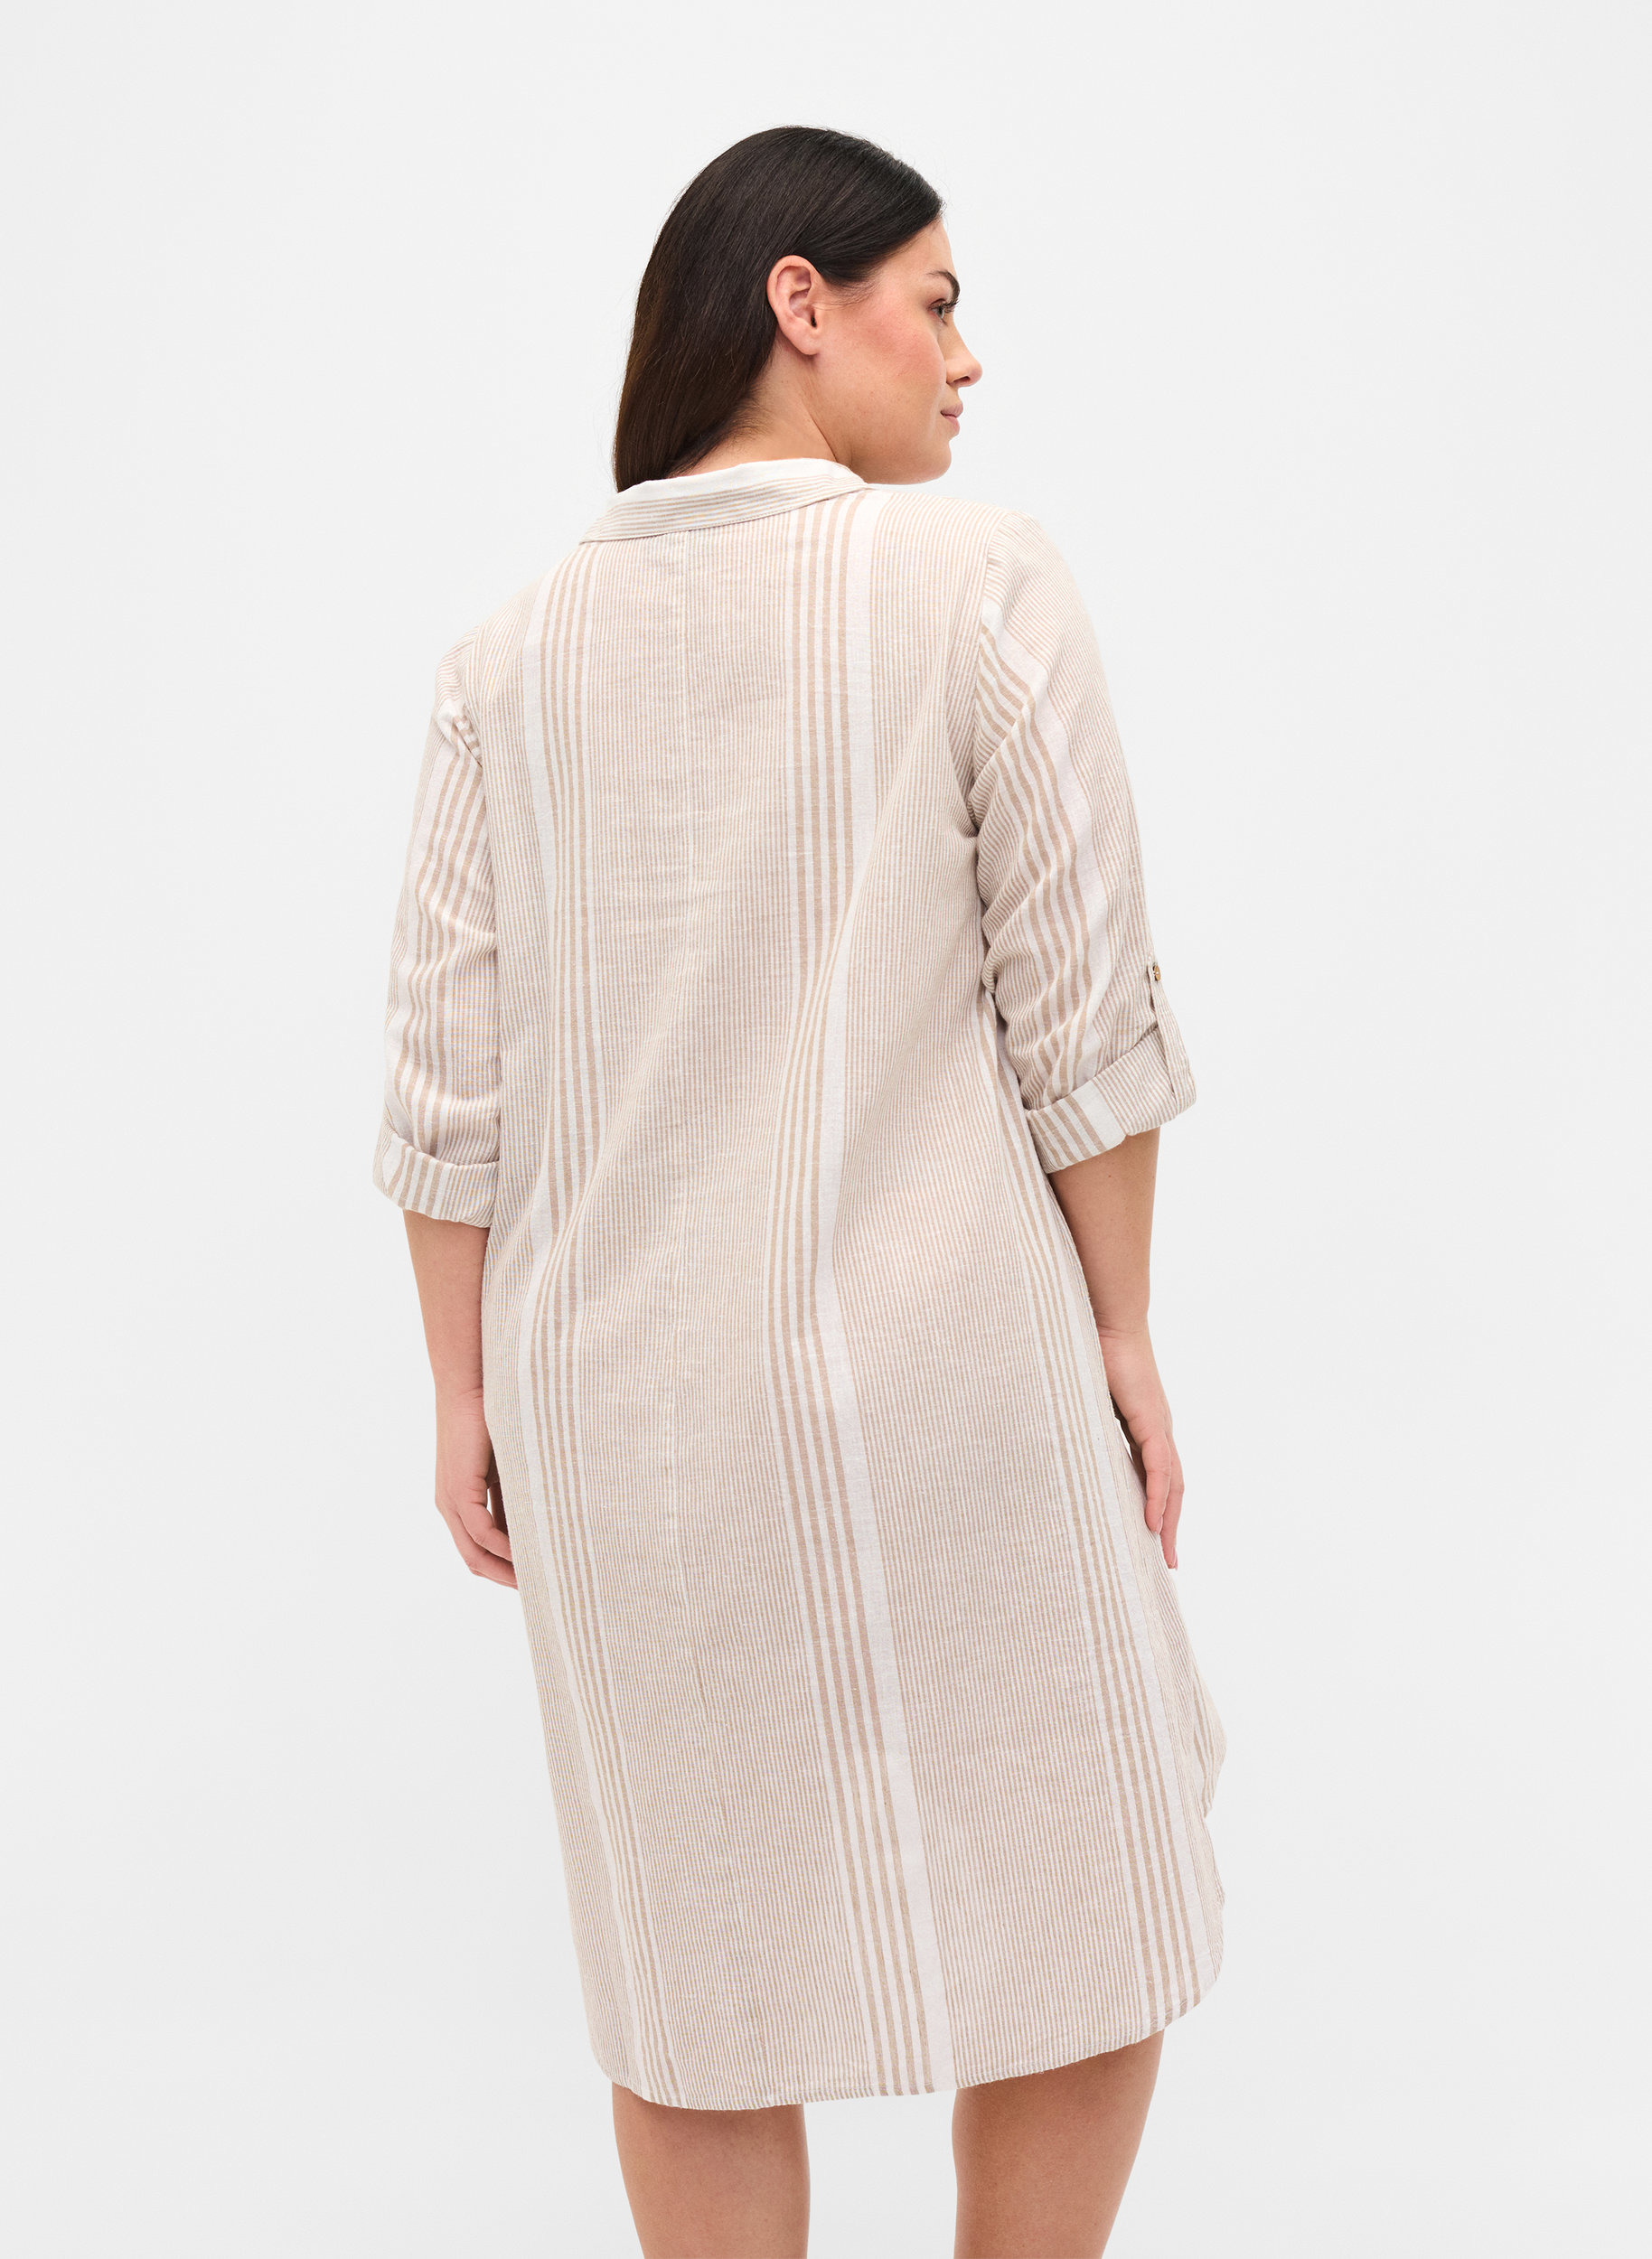 Dress with V neckline and collar, White Taupe Stripe, Model